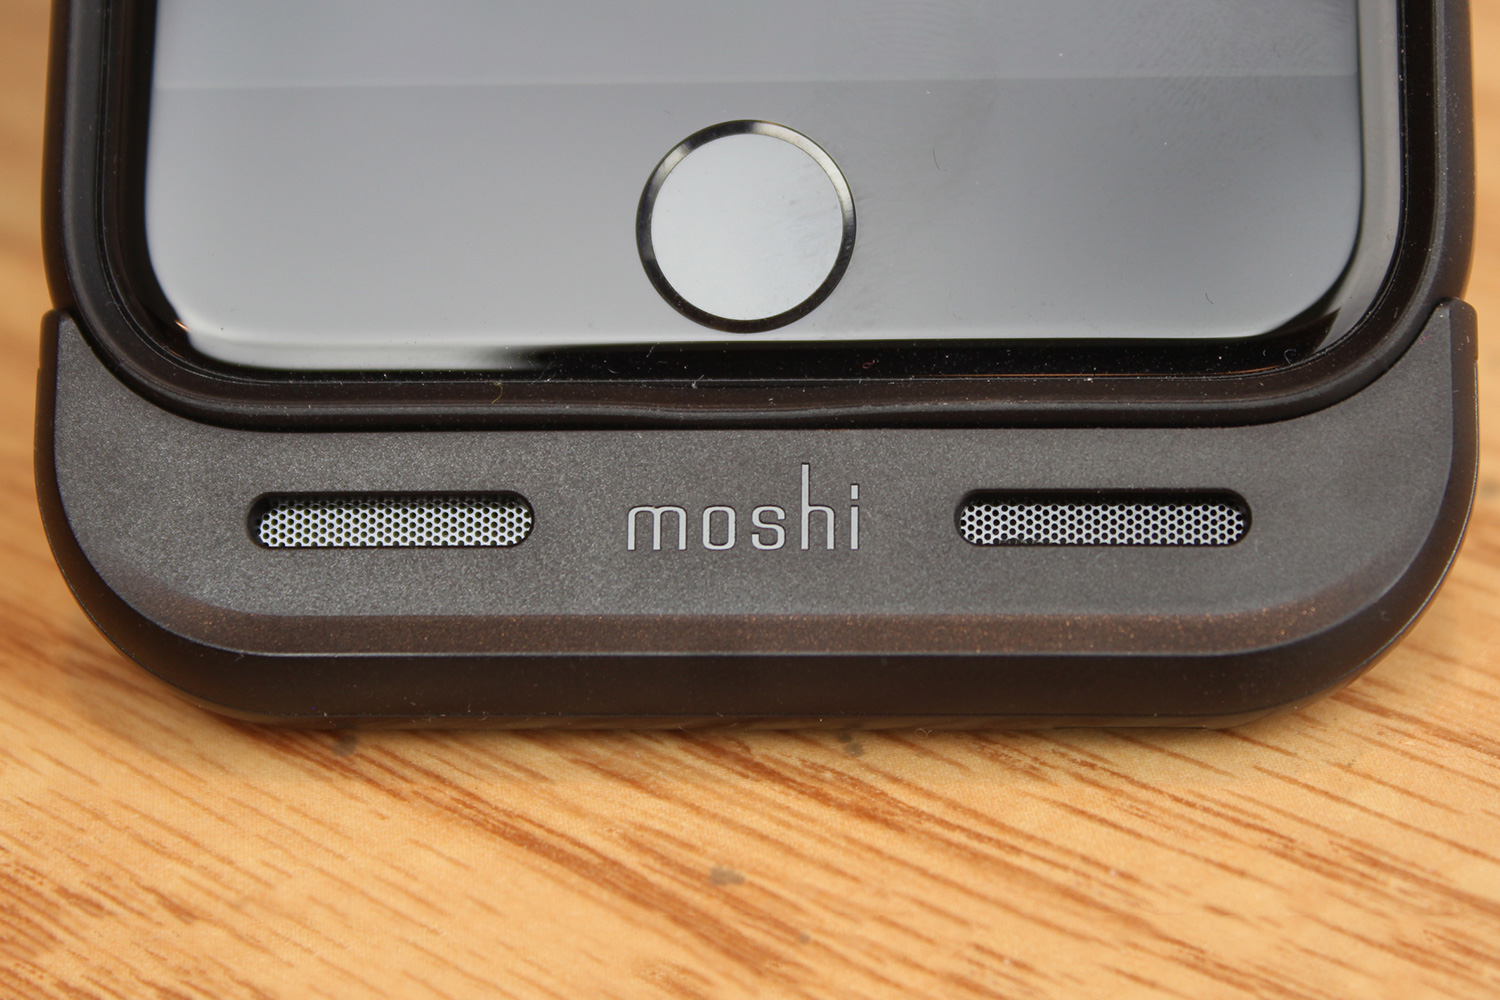 moshi ionsuit iphone 7 battery case video review mophie 2